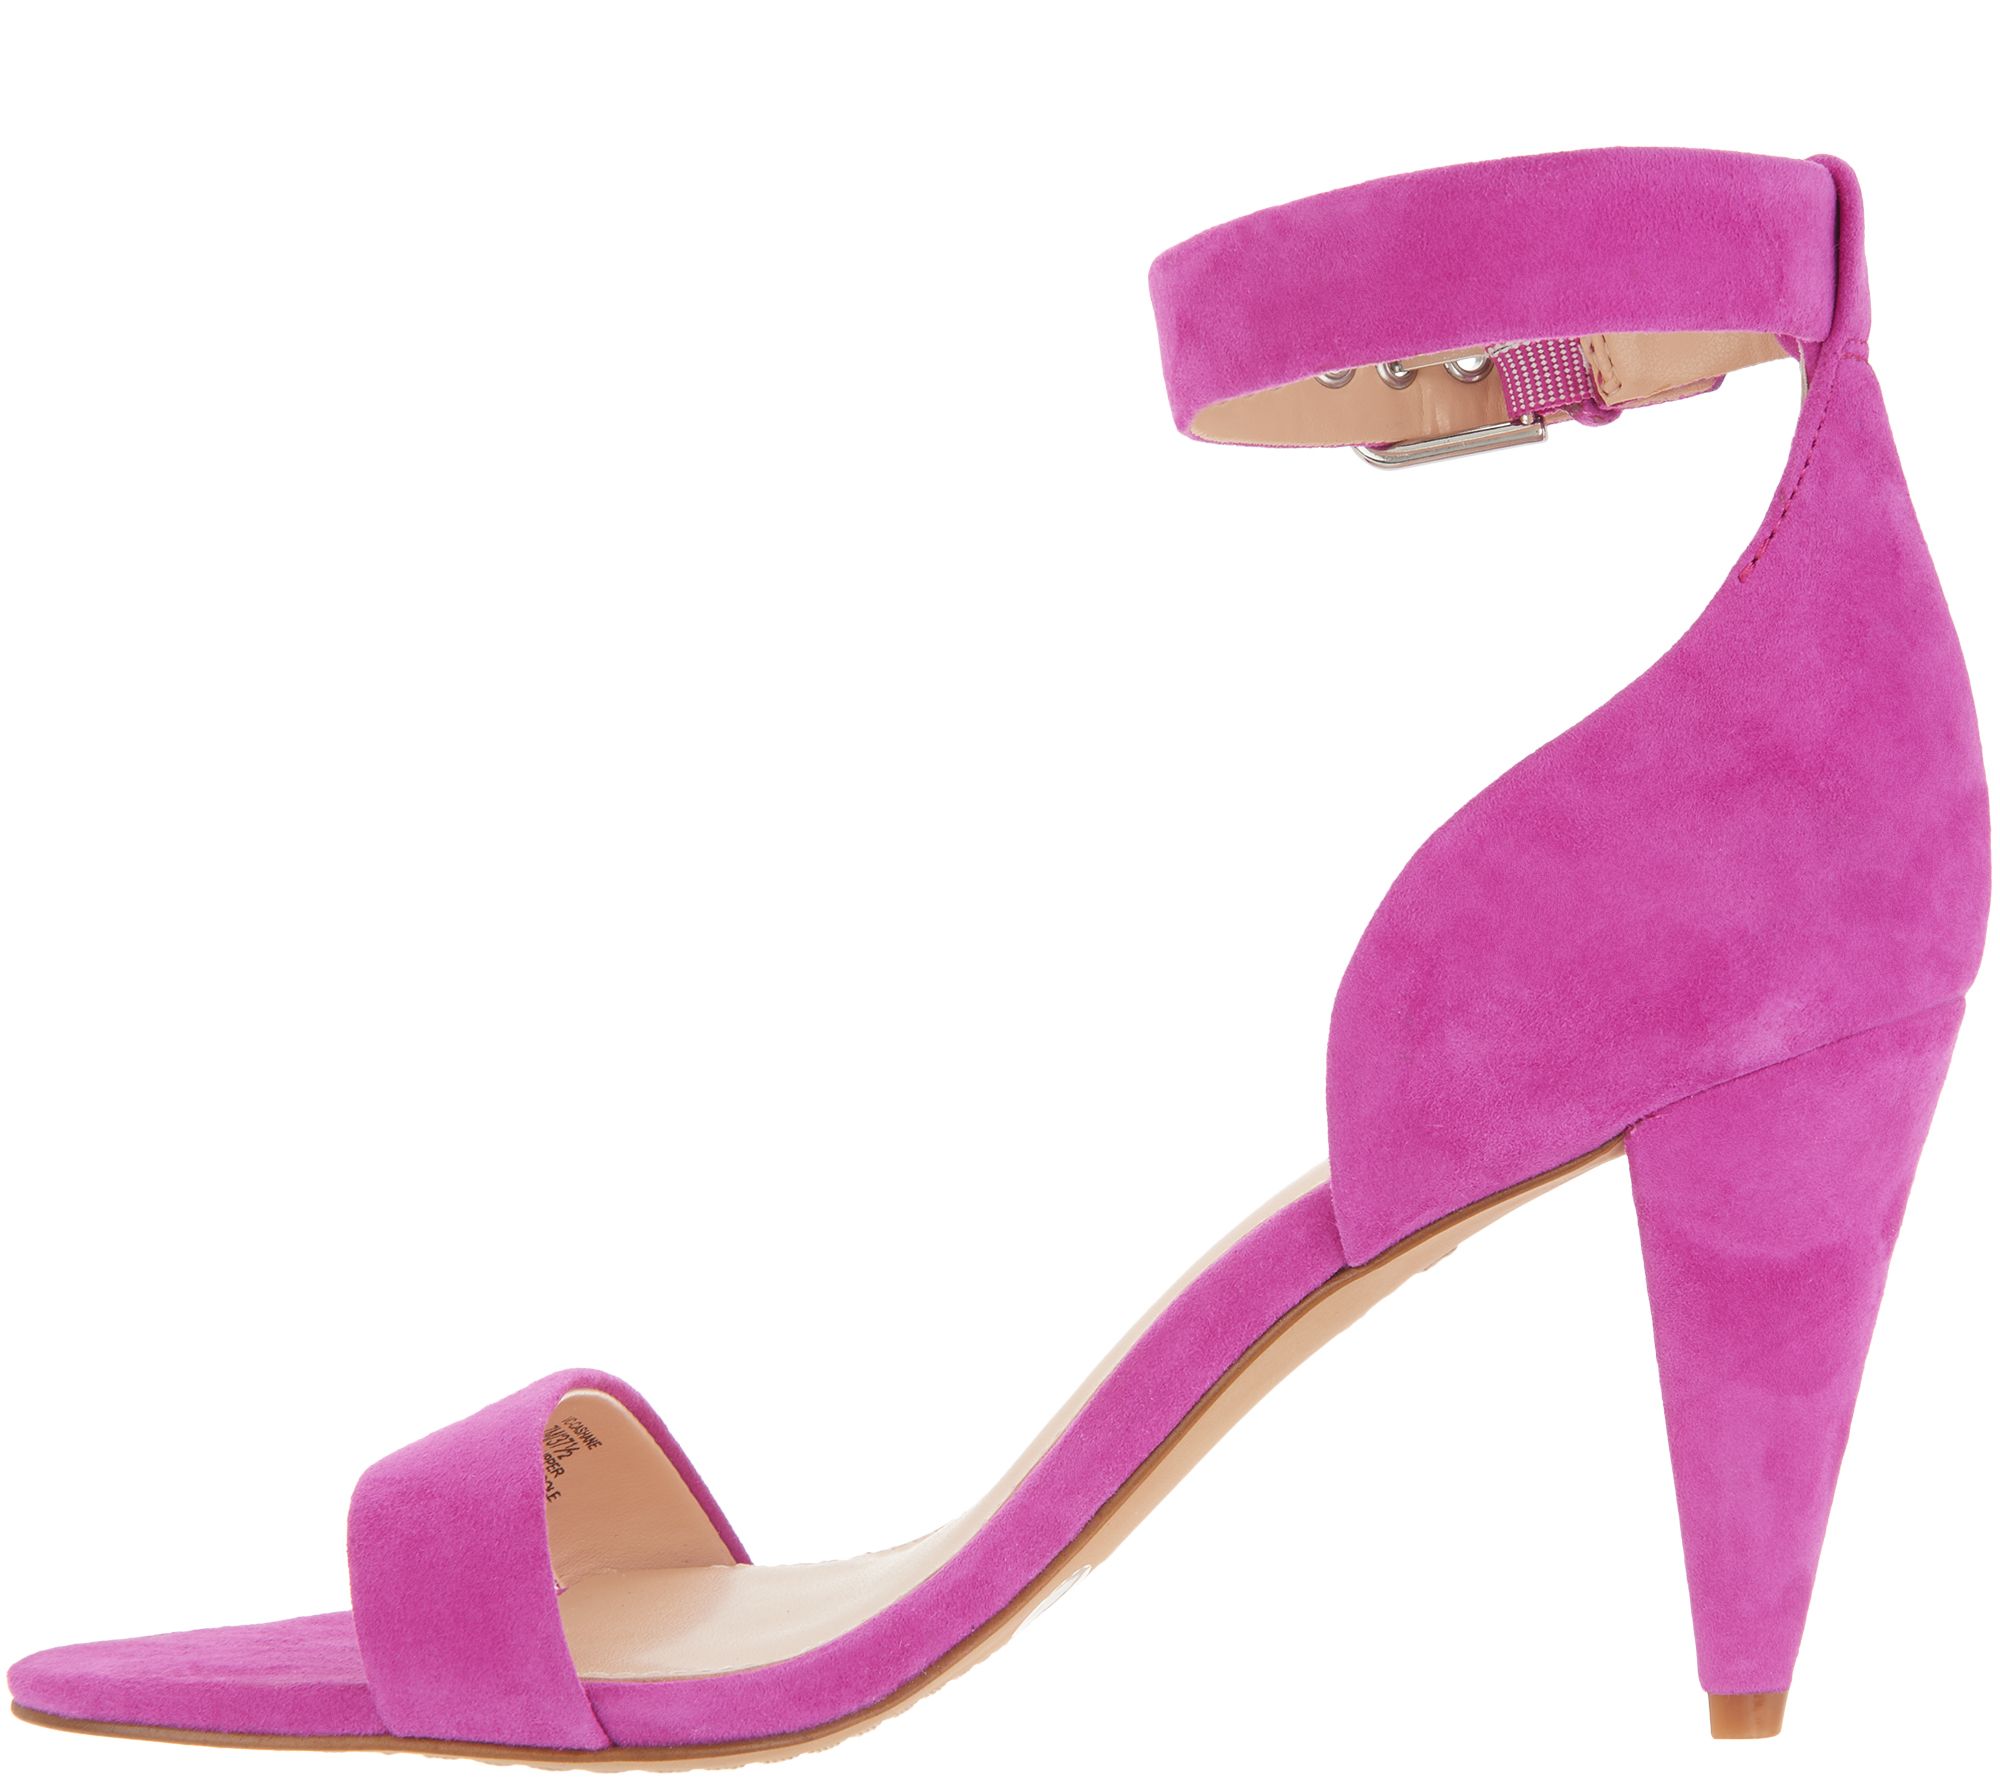 Vince Camuto Ankle Strap Sandals with Cone Heel - Cashane - QVC.com